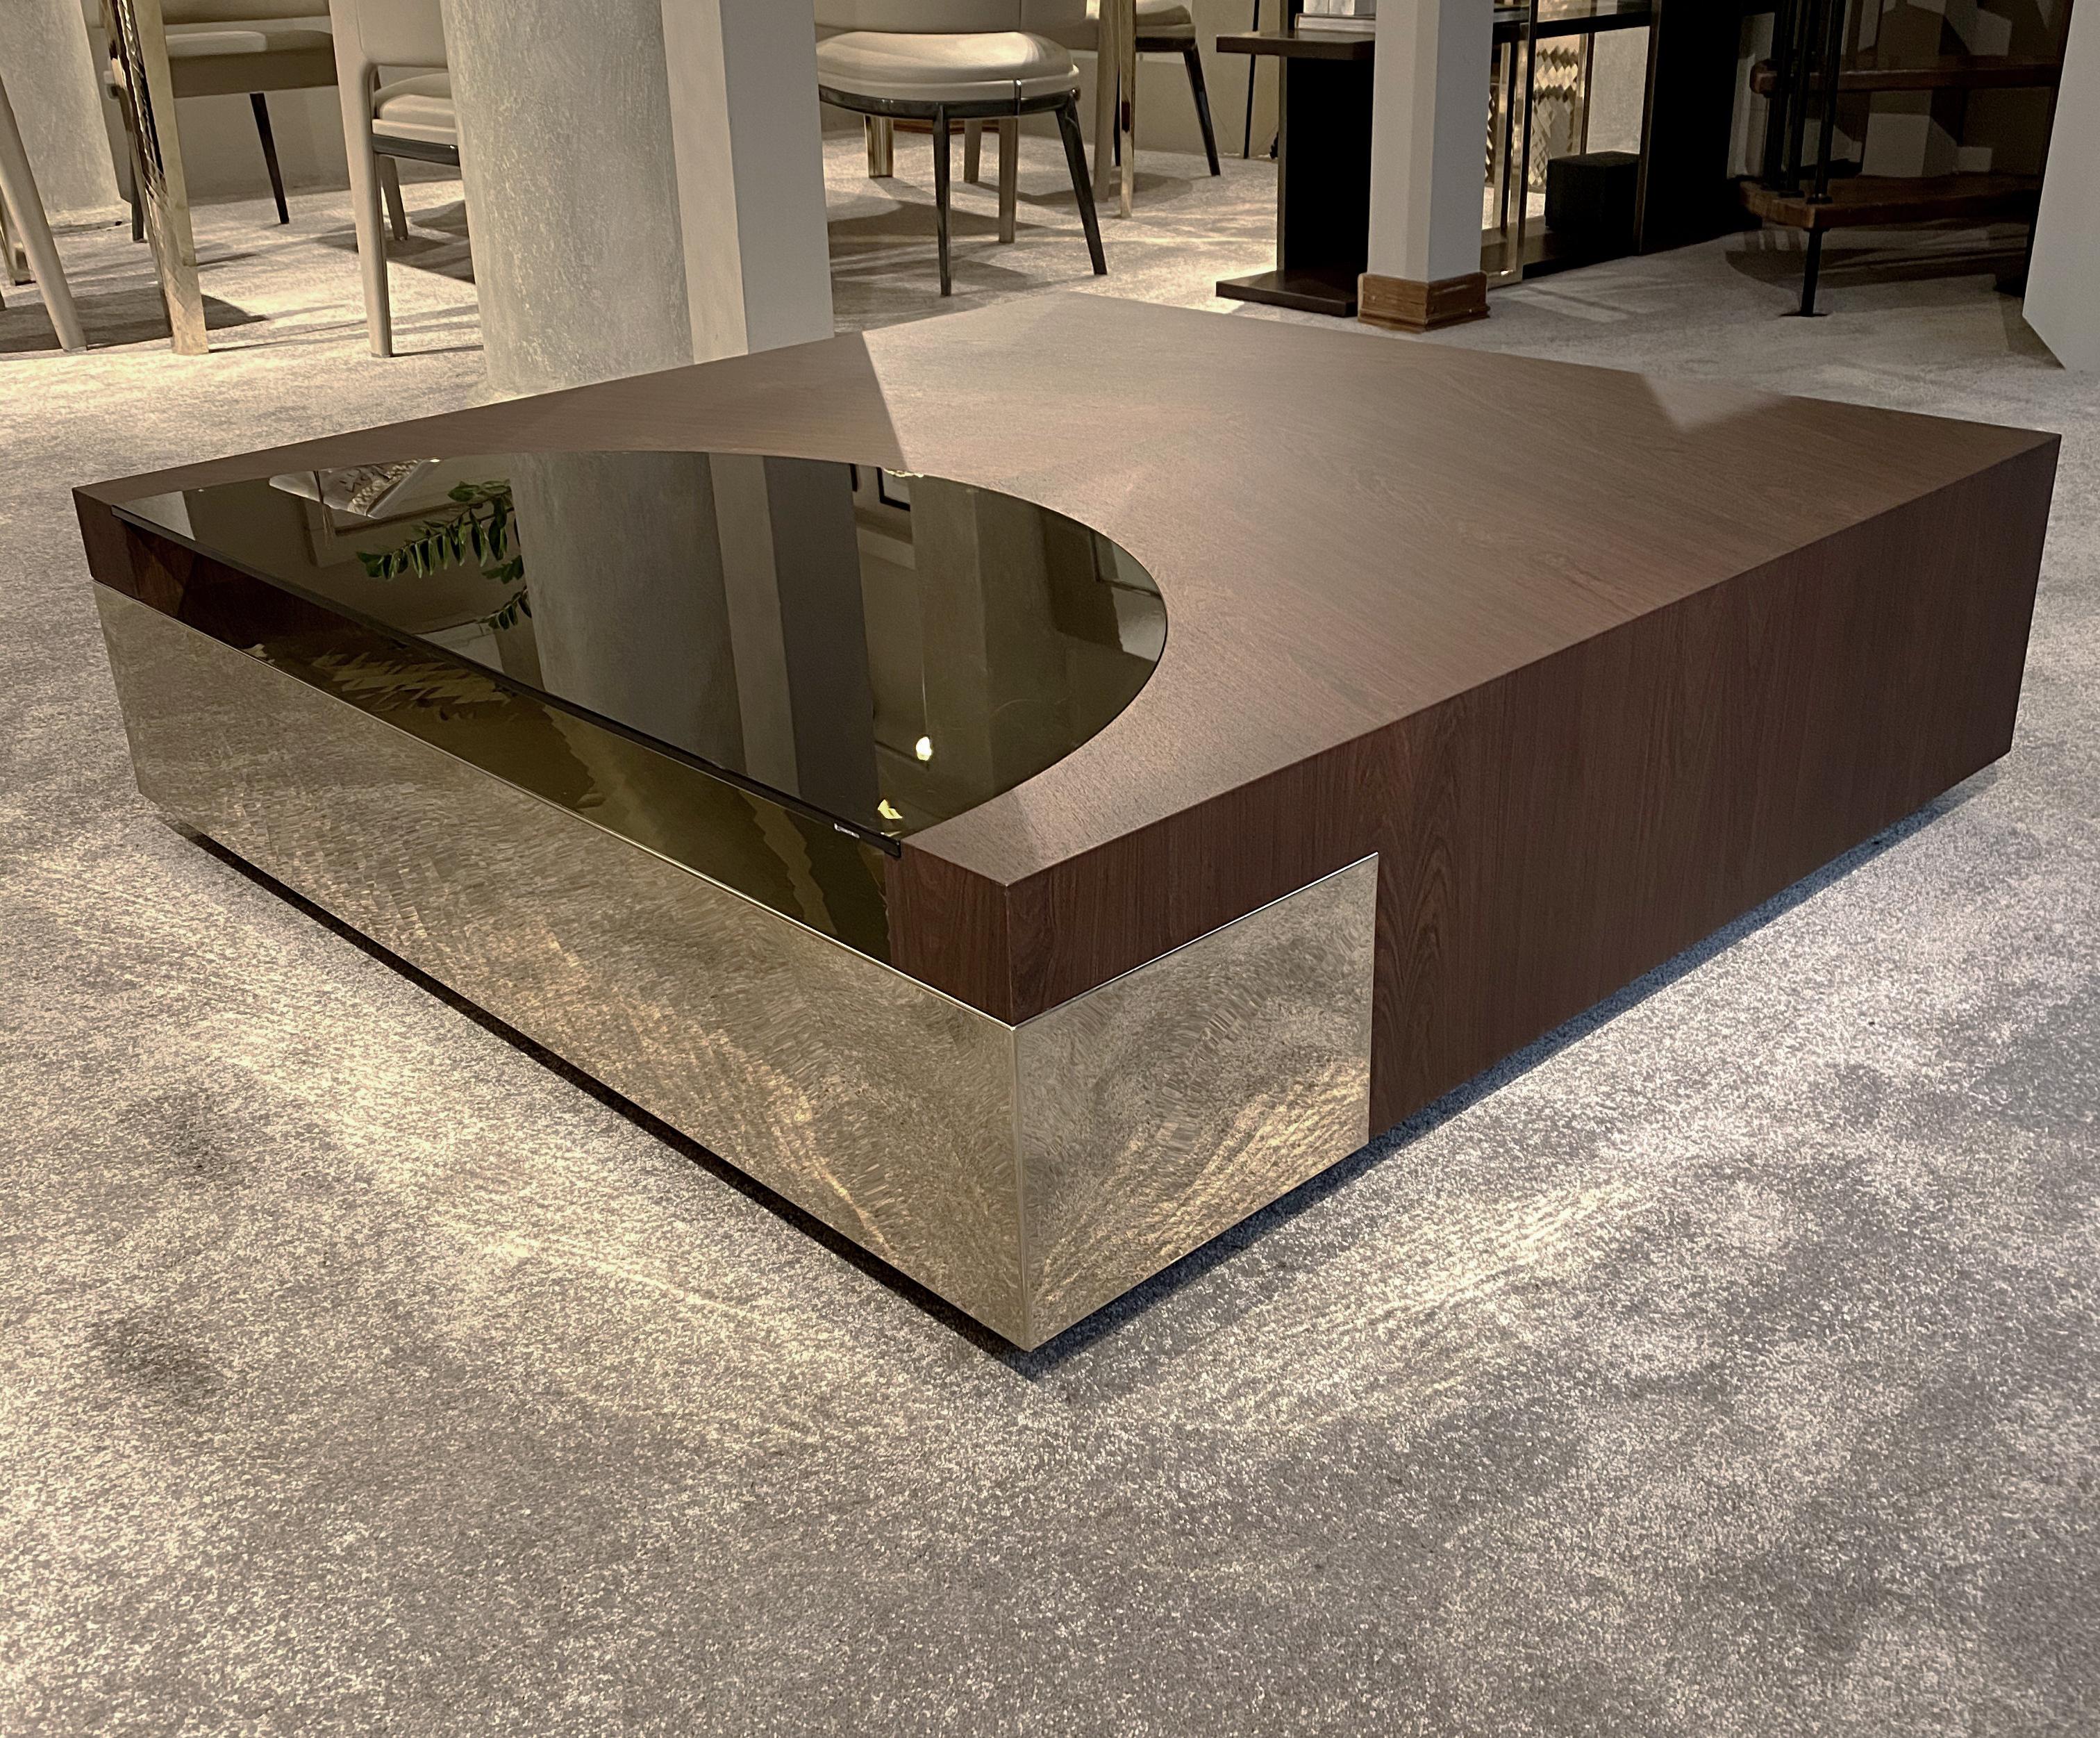 Low table by Andrea Bonini in steel gold finish, walnut smoked wood and bronzed glass.